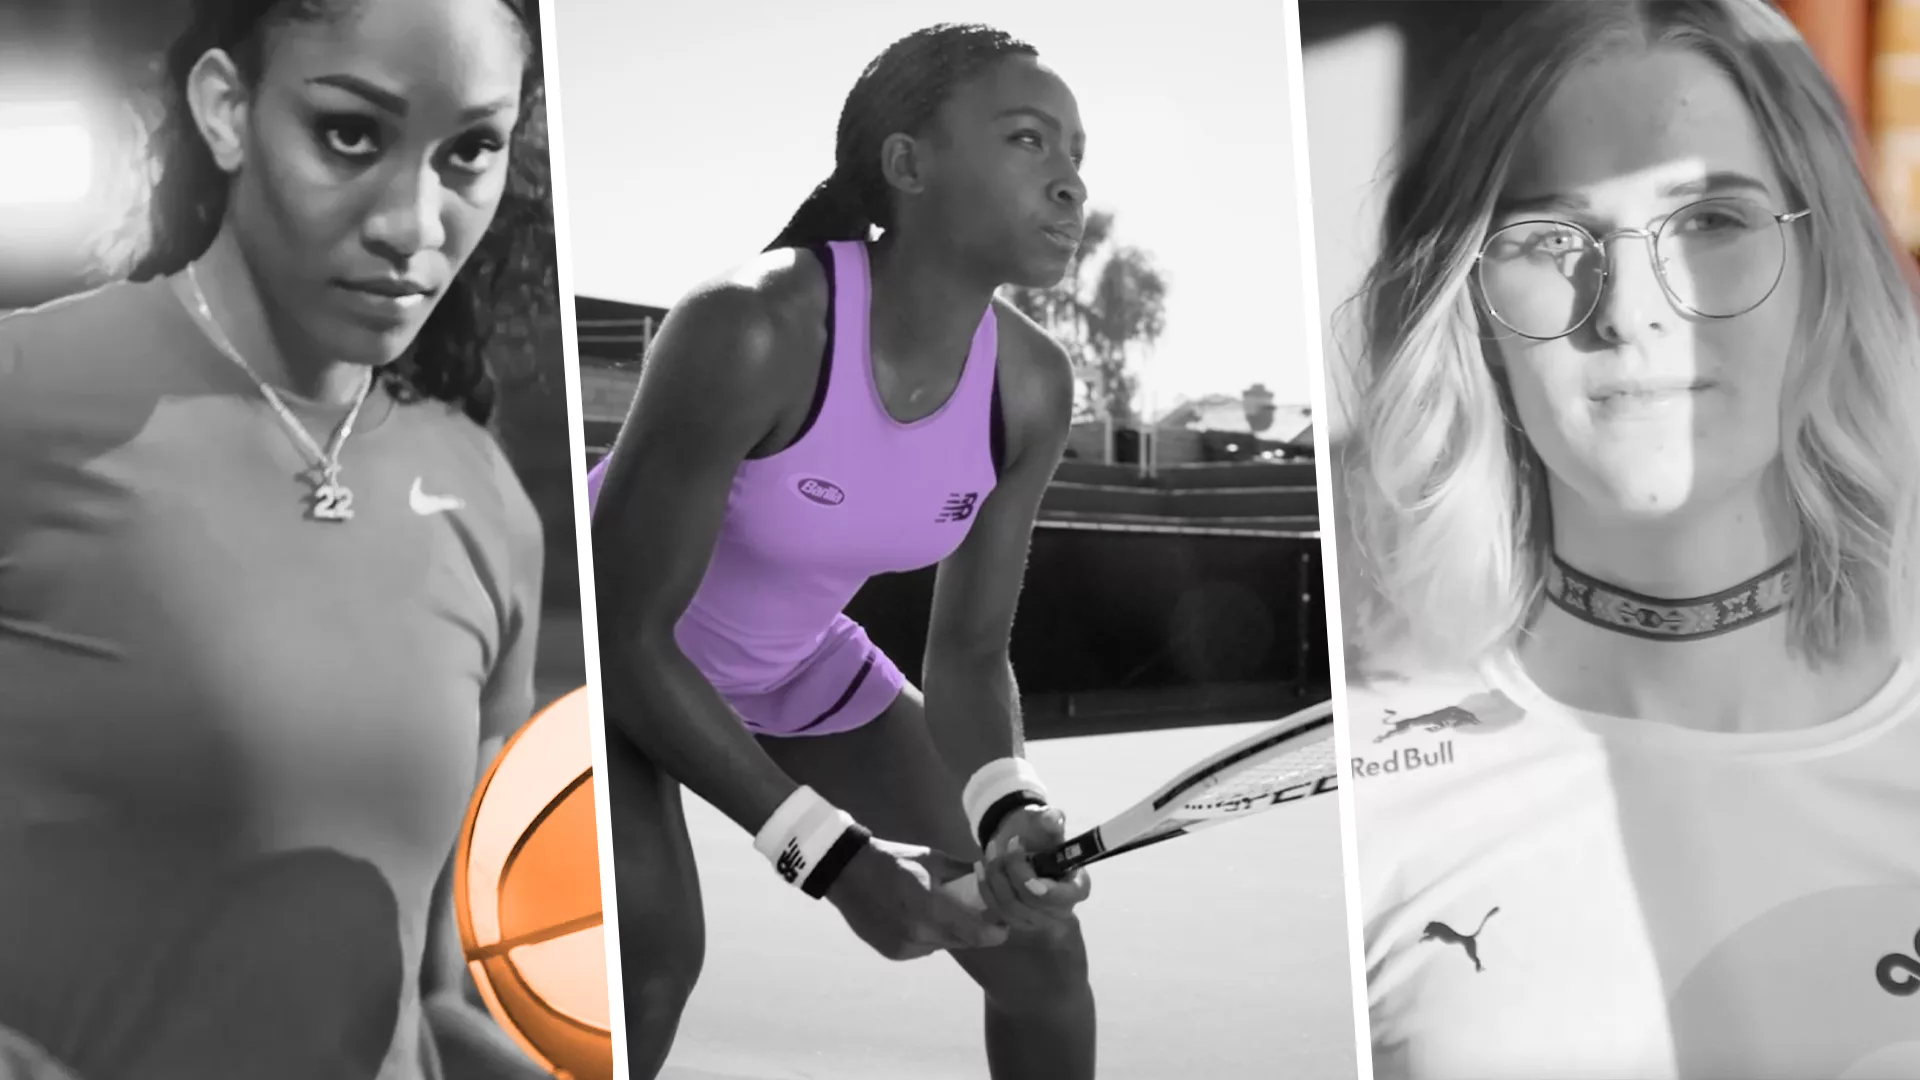 A photo collage featuring portrait photos of 5 game-changing women in sports: tennis player Coco Gauff, Could9's Halee Mason, tennis legend Billie Jean King, snowboarder Kiana Clay, and Special Olympics athlete Loretta Claiborne